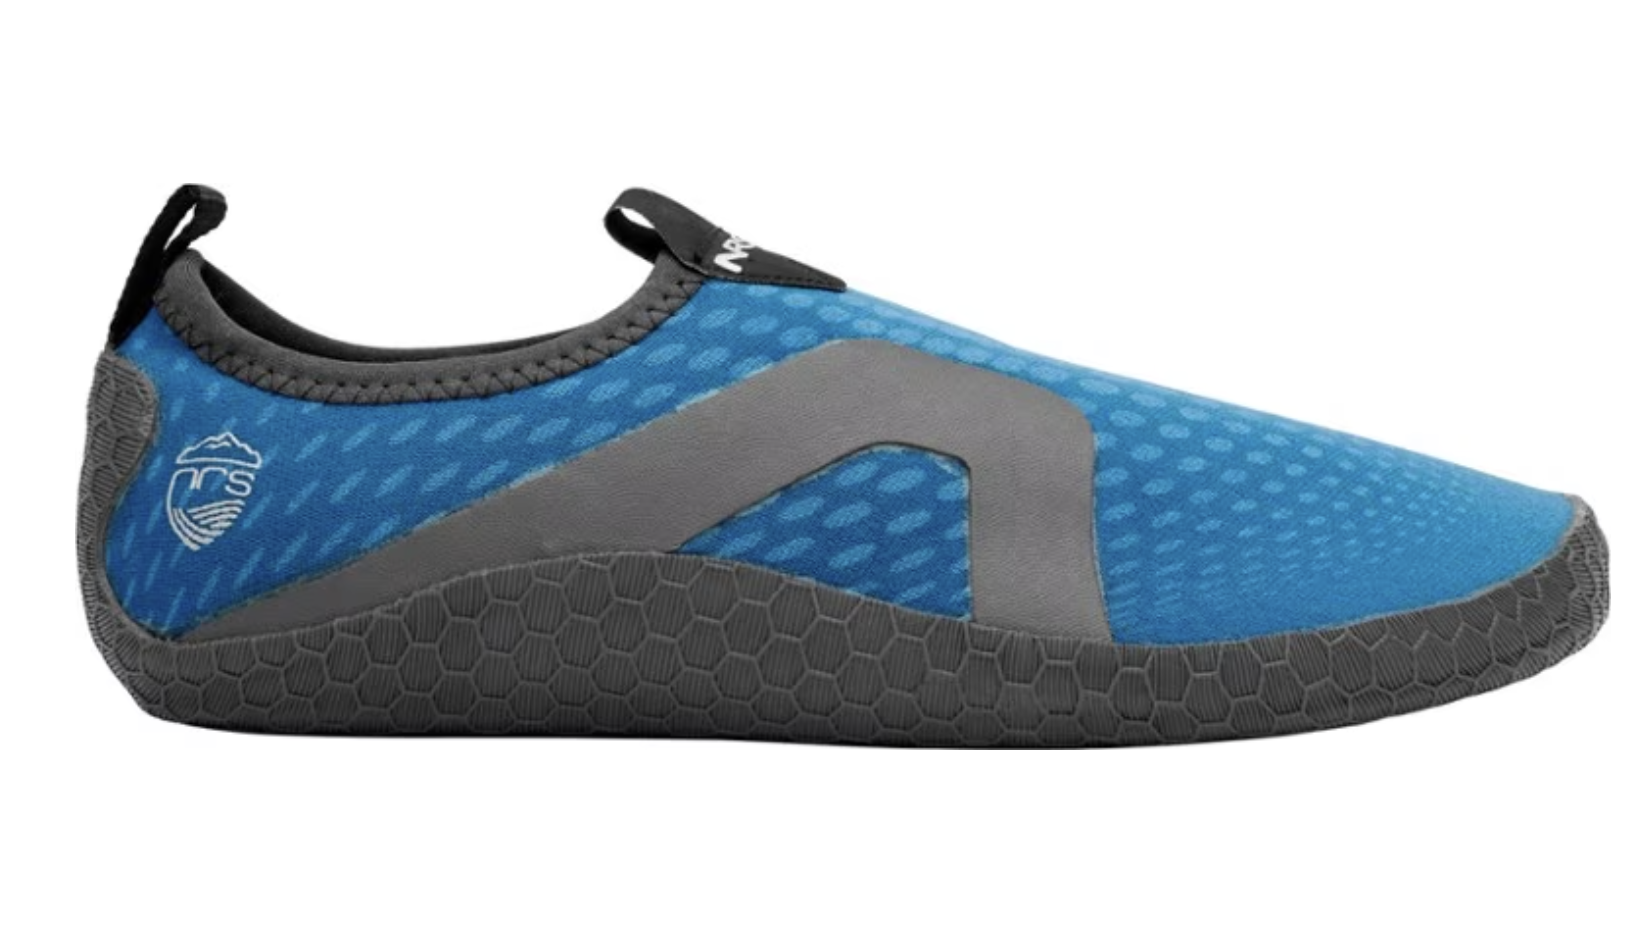 NRS Arroyo water shoes